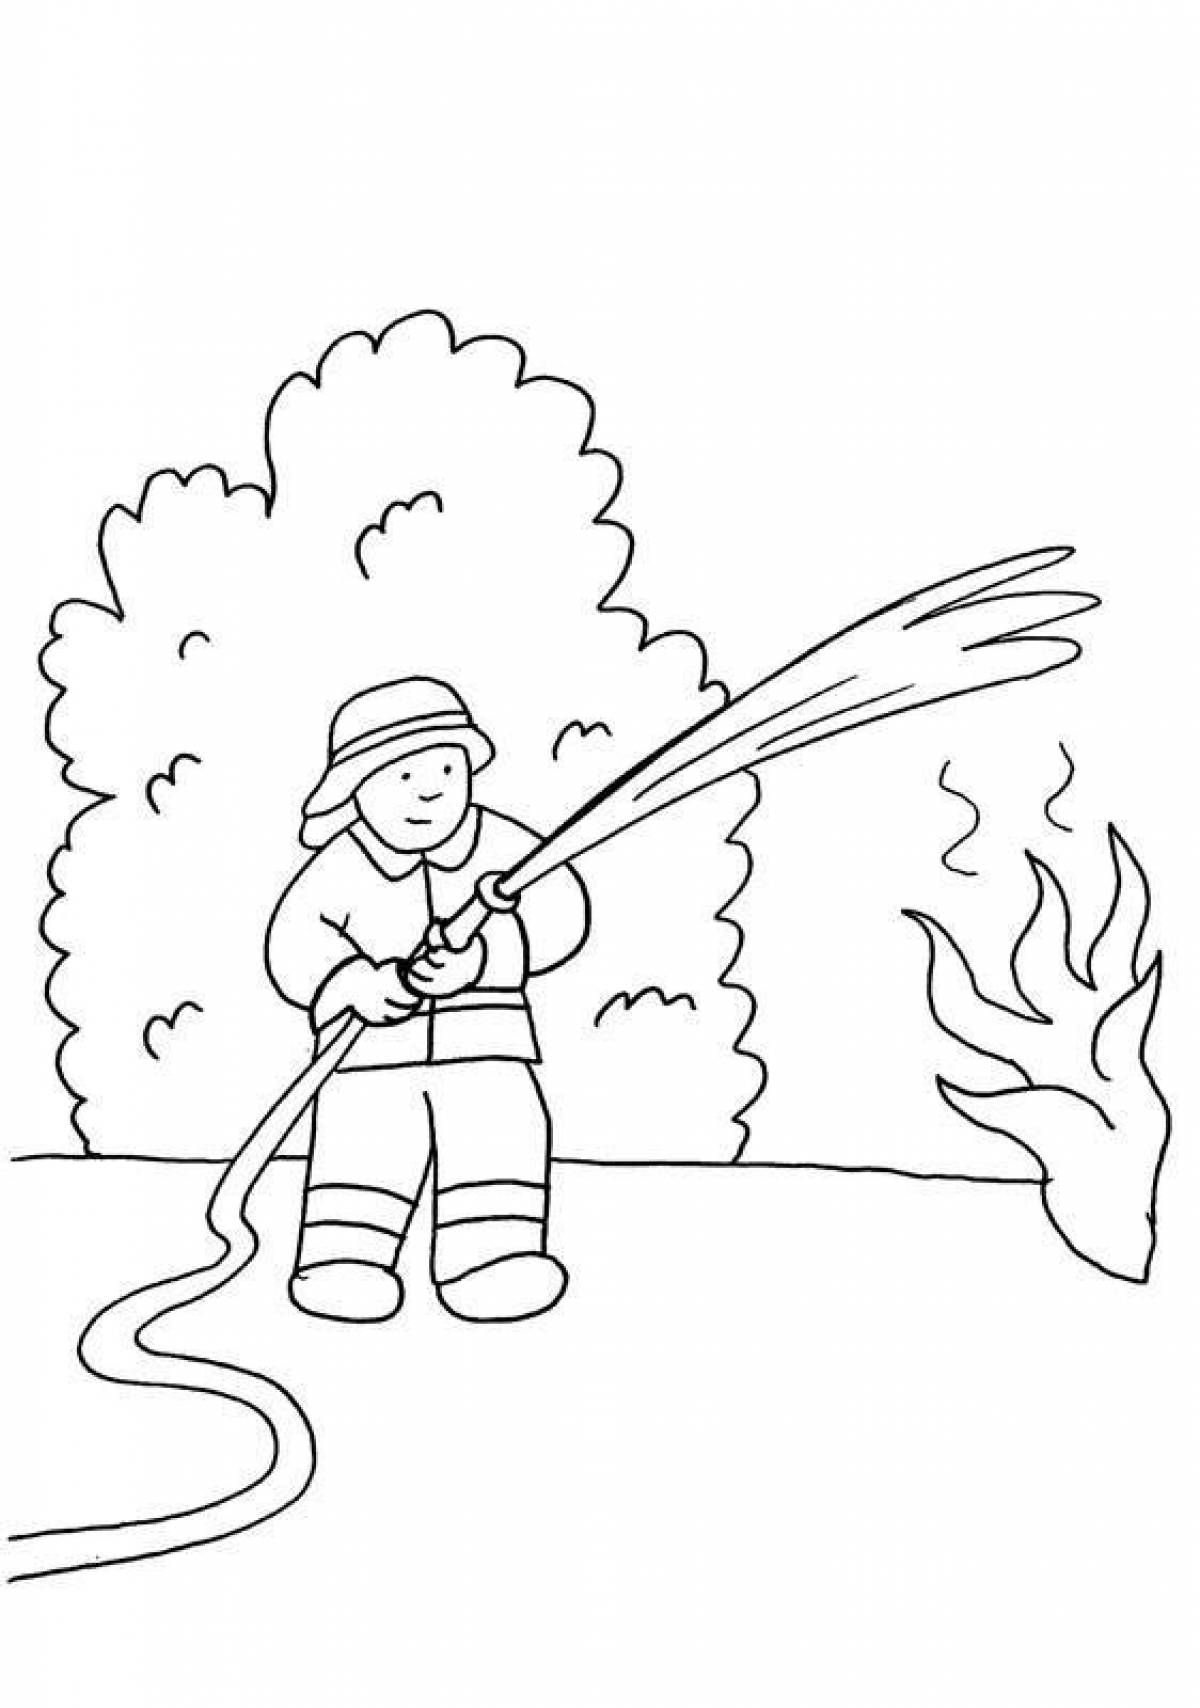 Creative fireman coloring book for kids